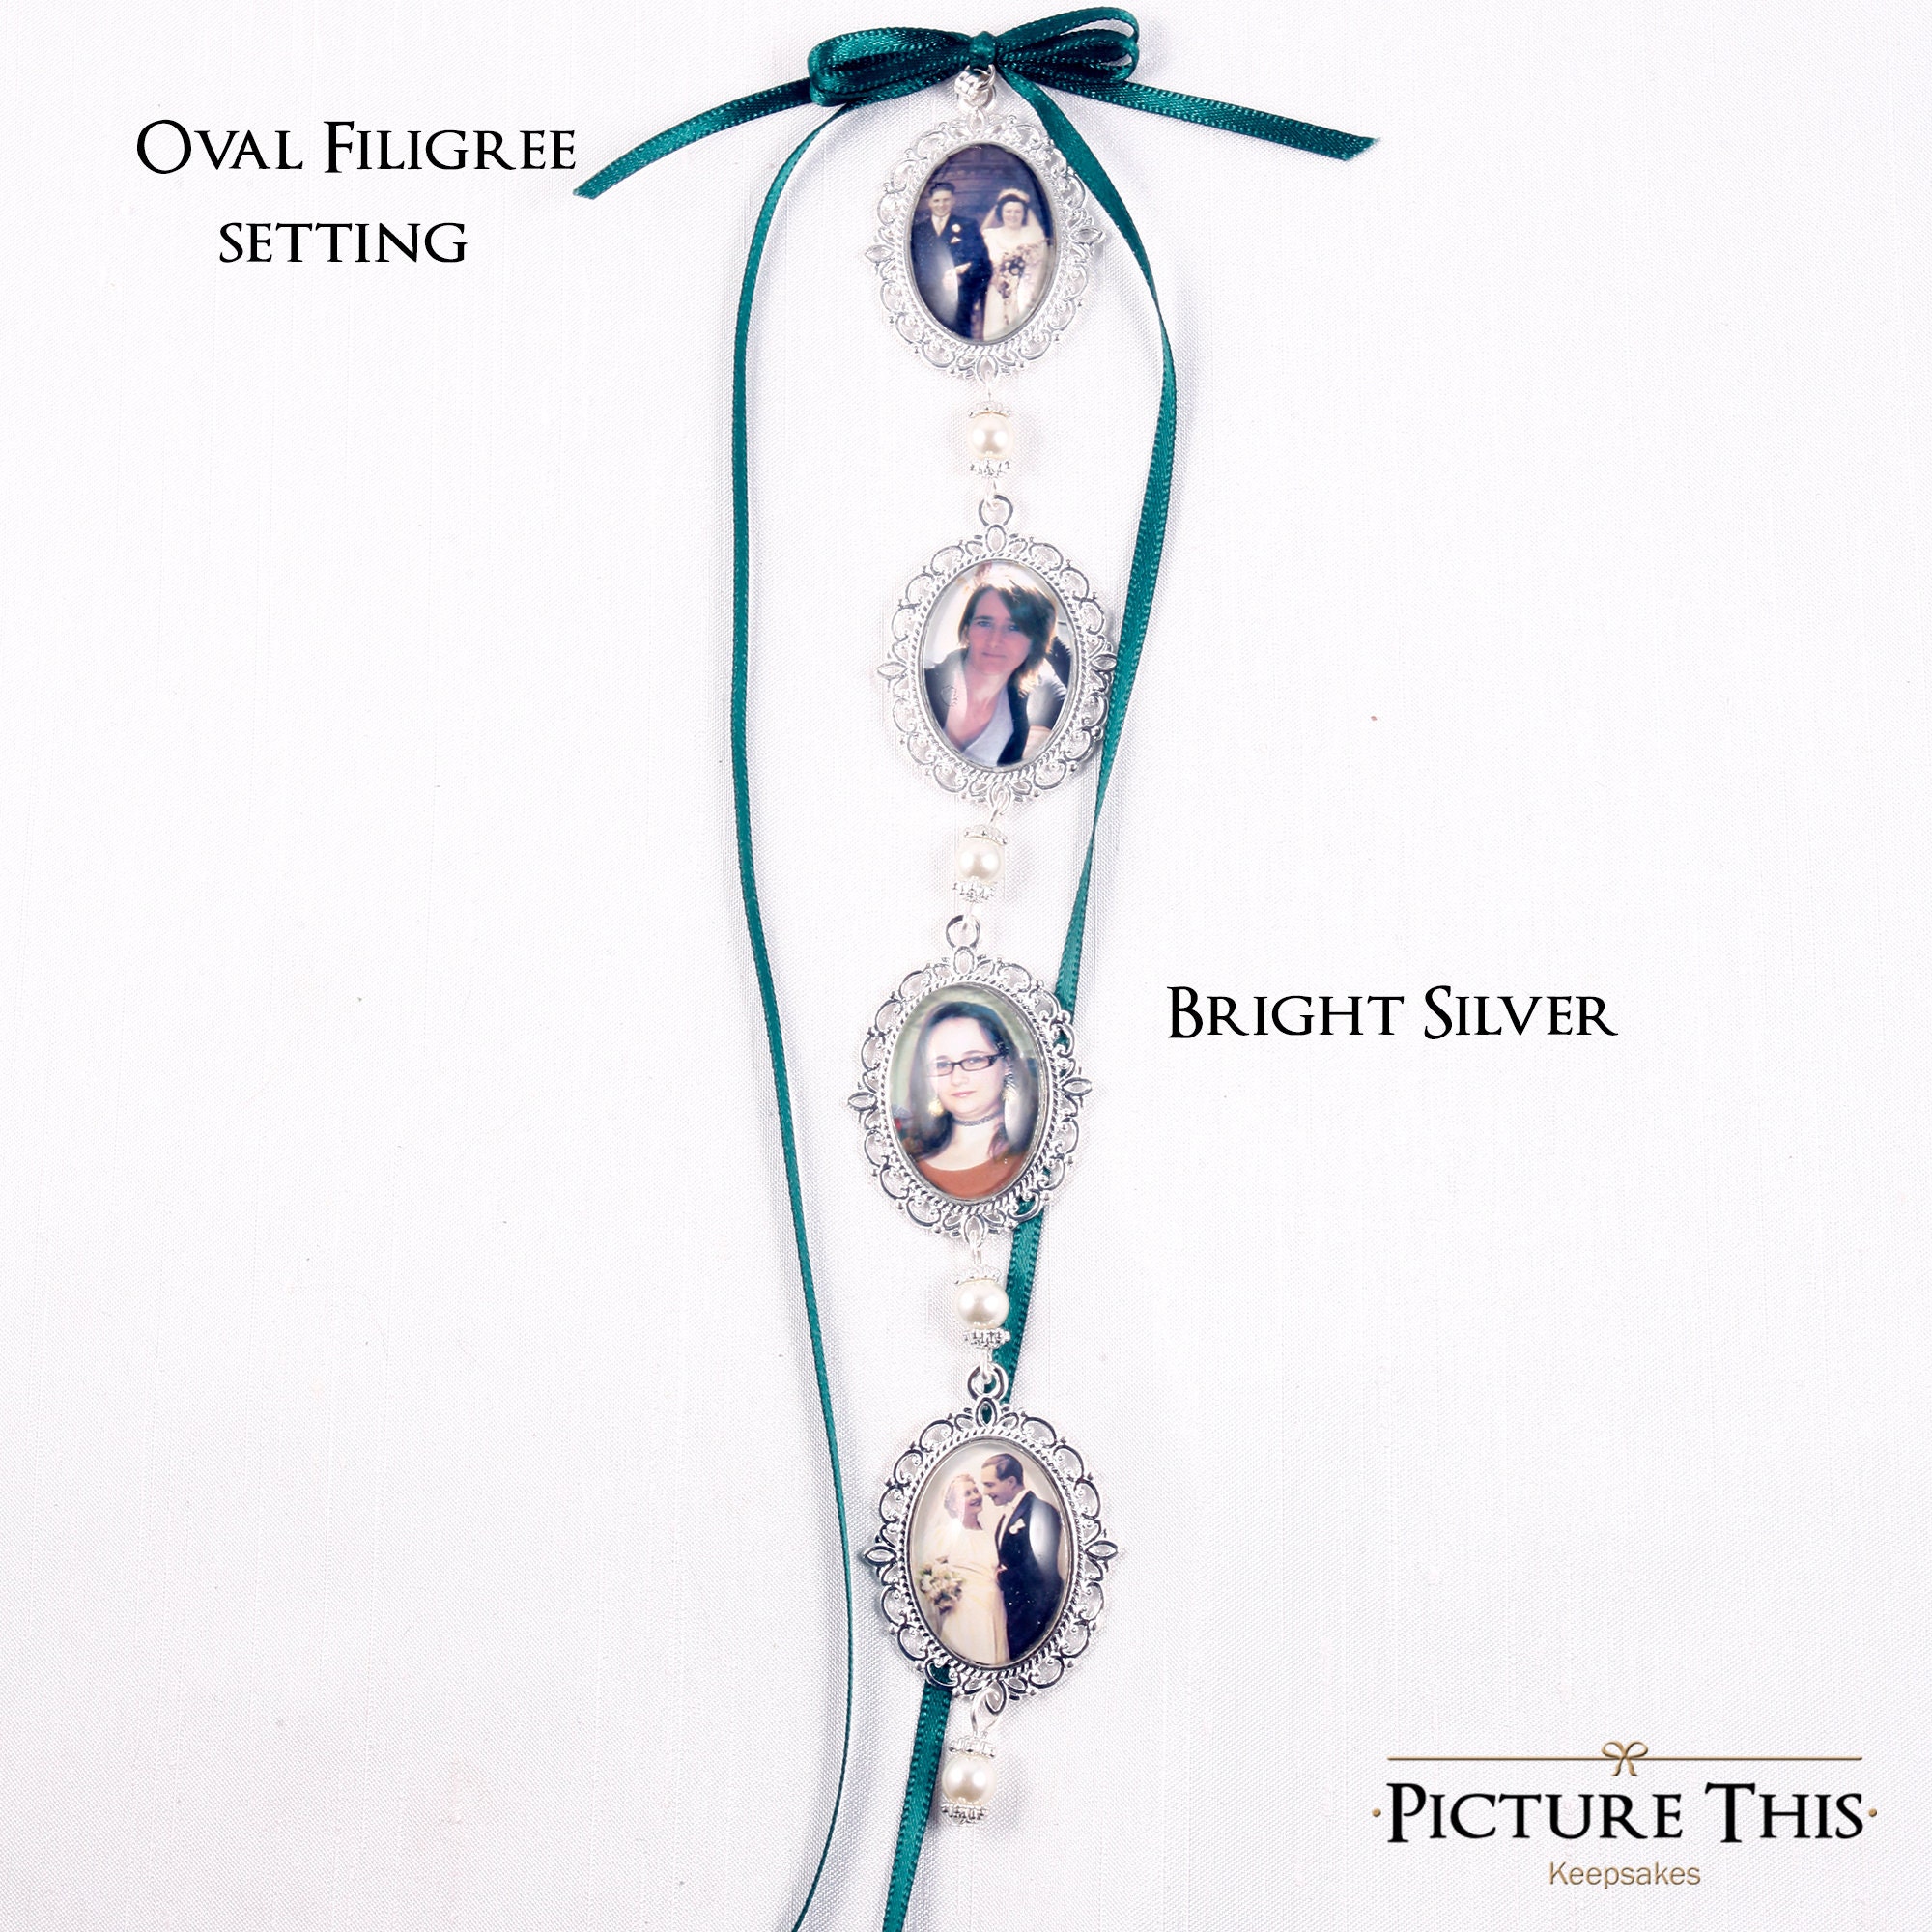 Double Sided Heart Bouquet Charm – Onememorylane